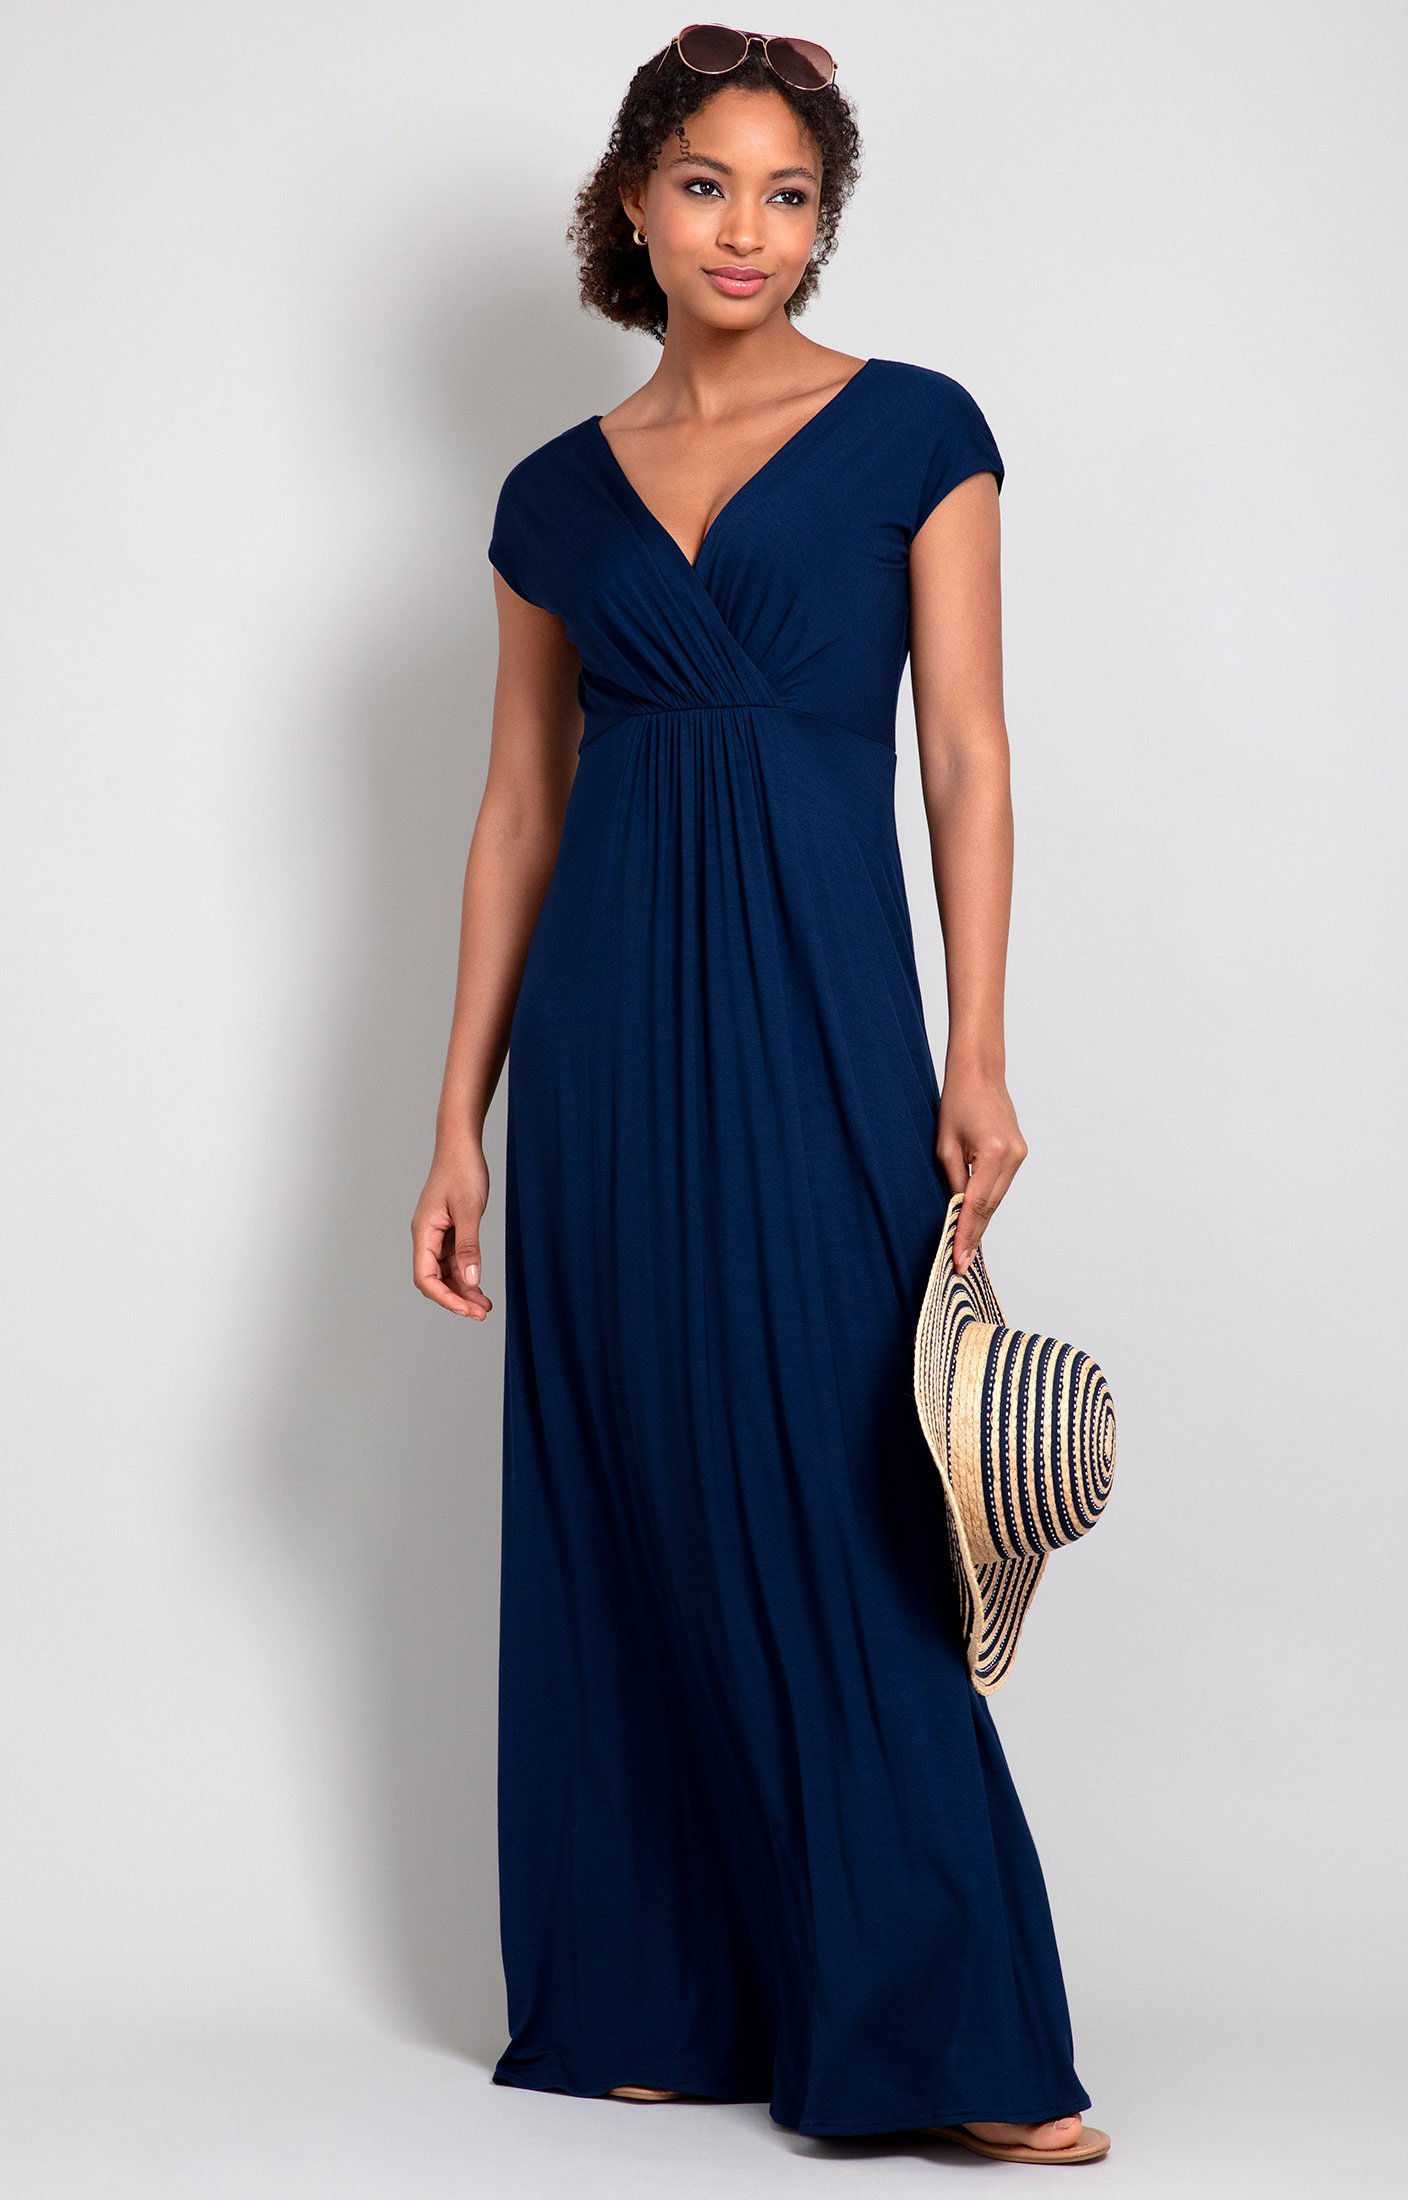 Maxi Evening Dress Clothes Sophia and Wear by Dresses, Wedding - Party Blue Alie Navy